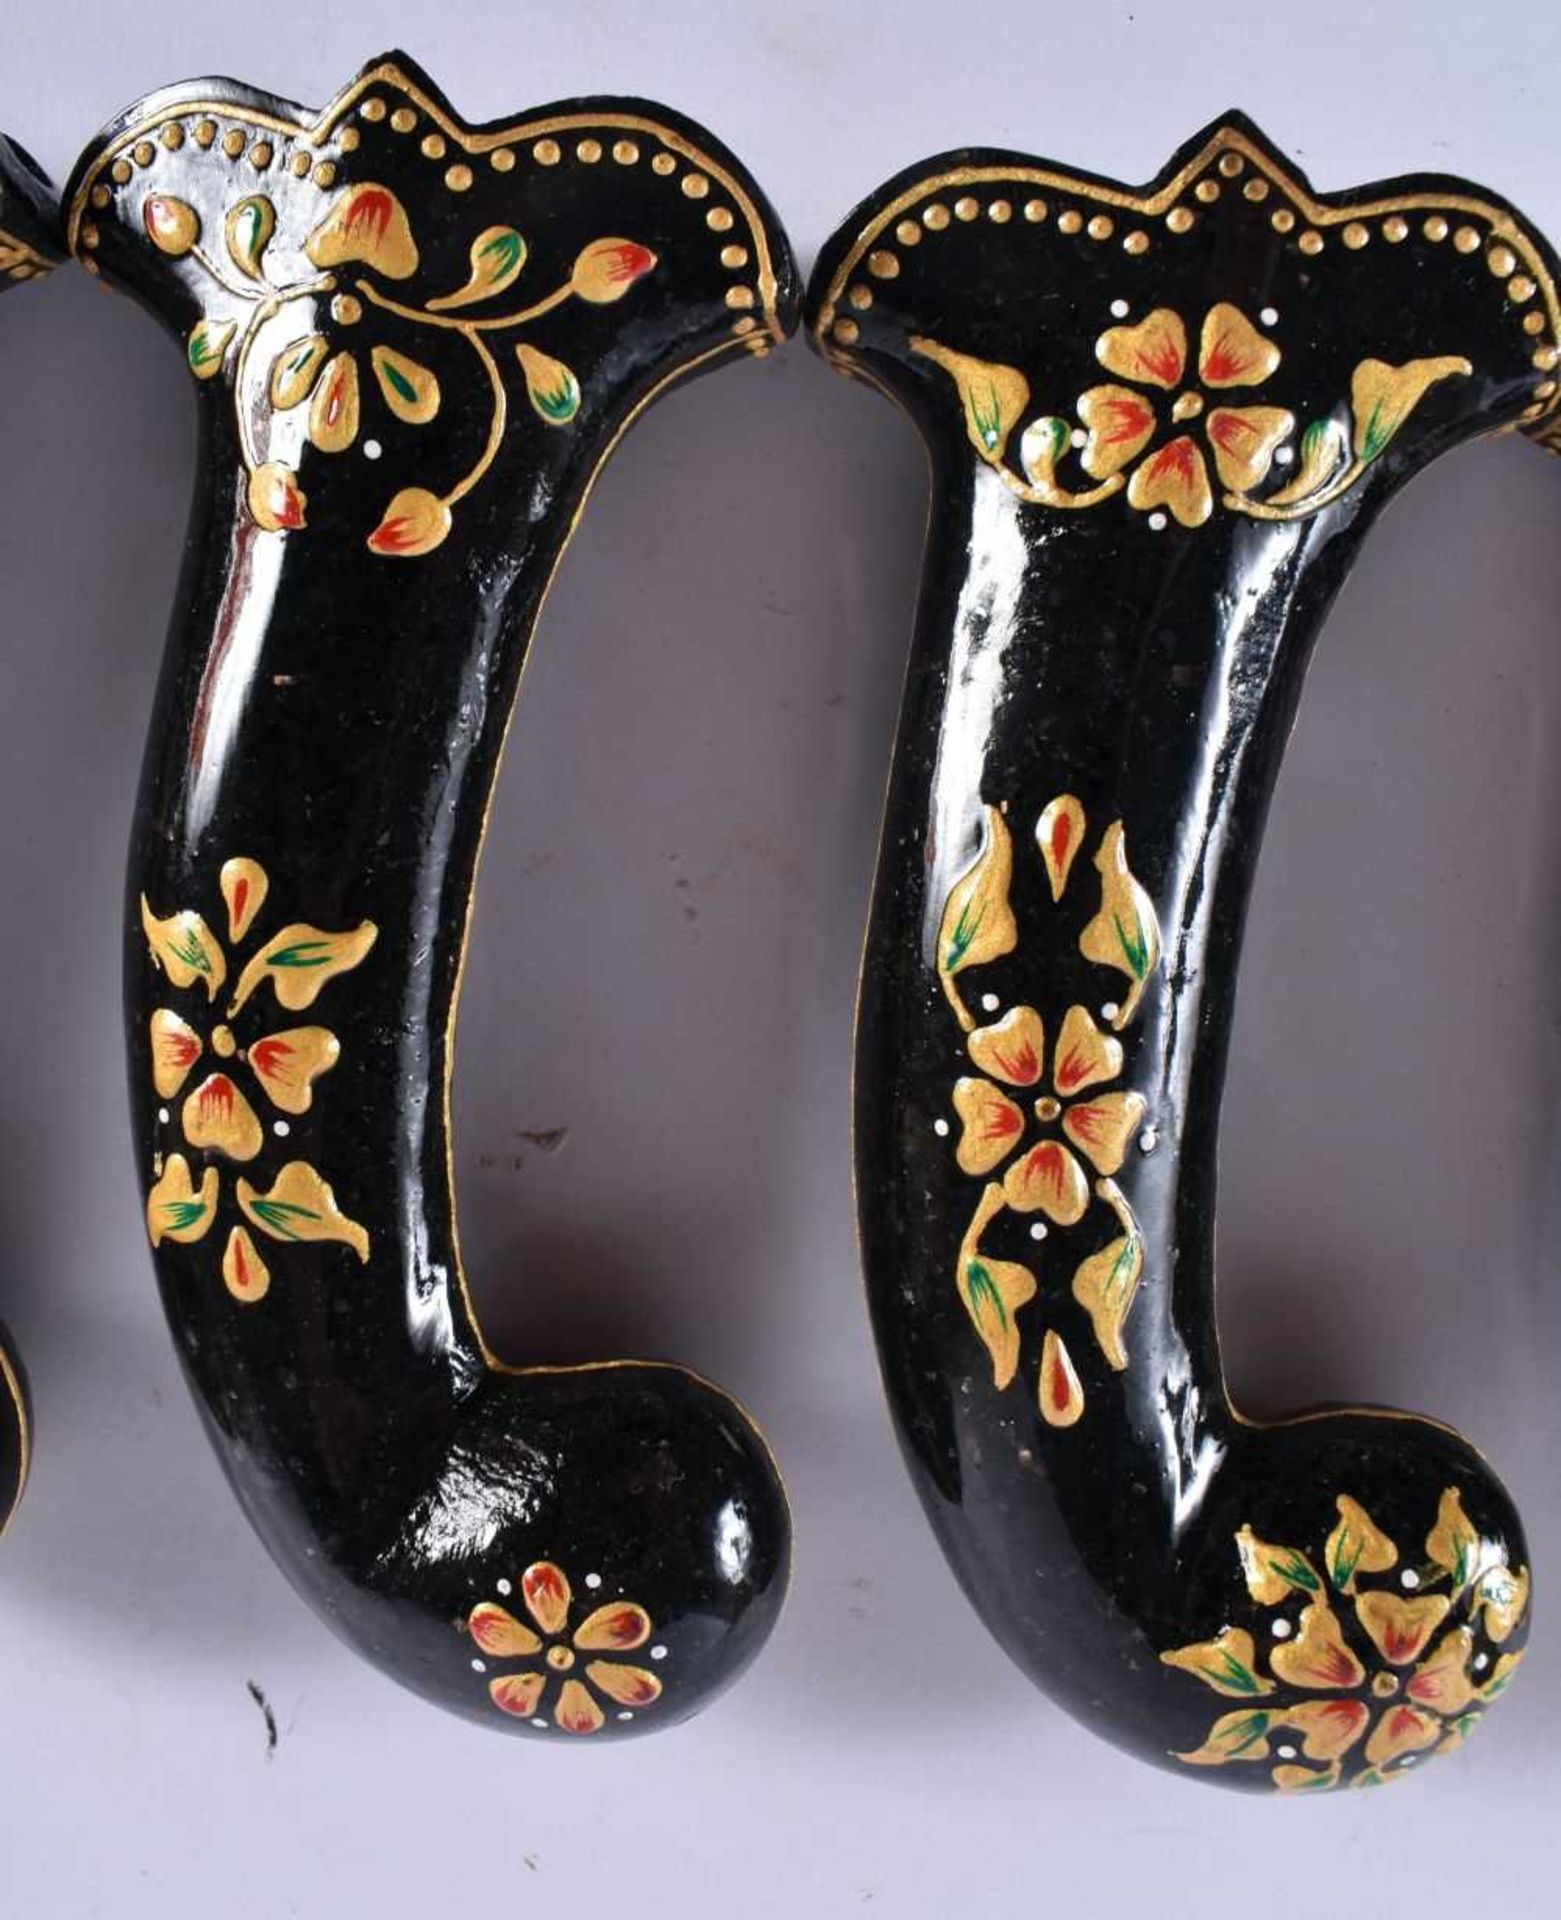 A SET OF FIVE MIDDLE EASTERN QAJAR LACQUER HARDSTONE DAGGER HANDLES overlaid with foliage and vines. - Image 3 of 6